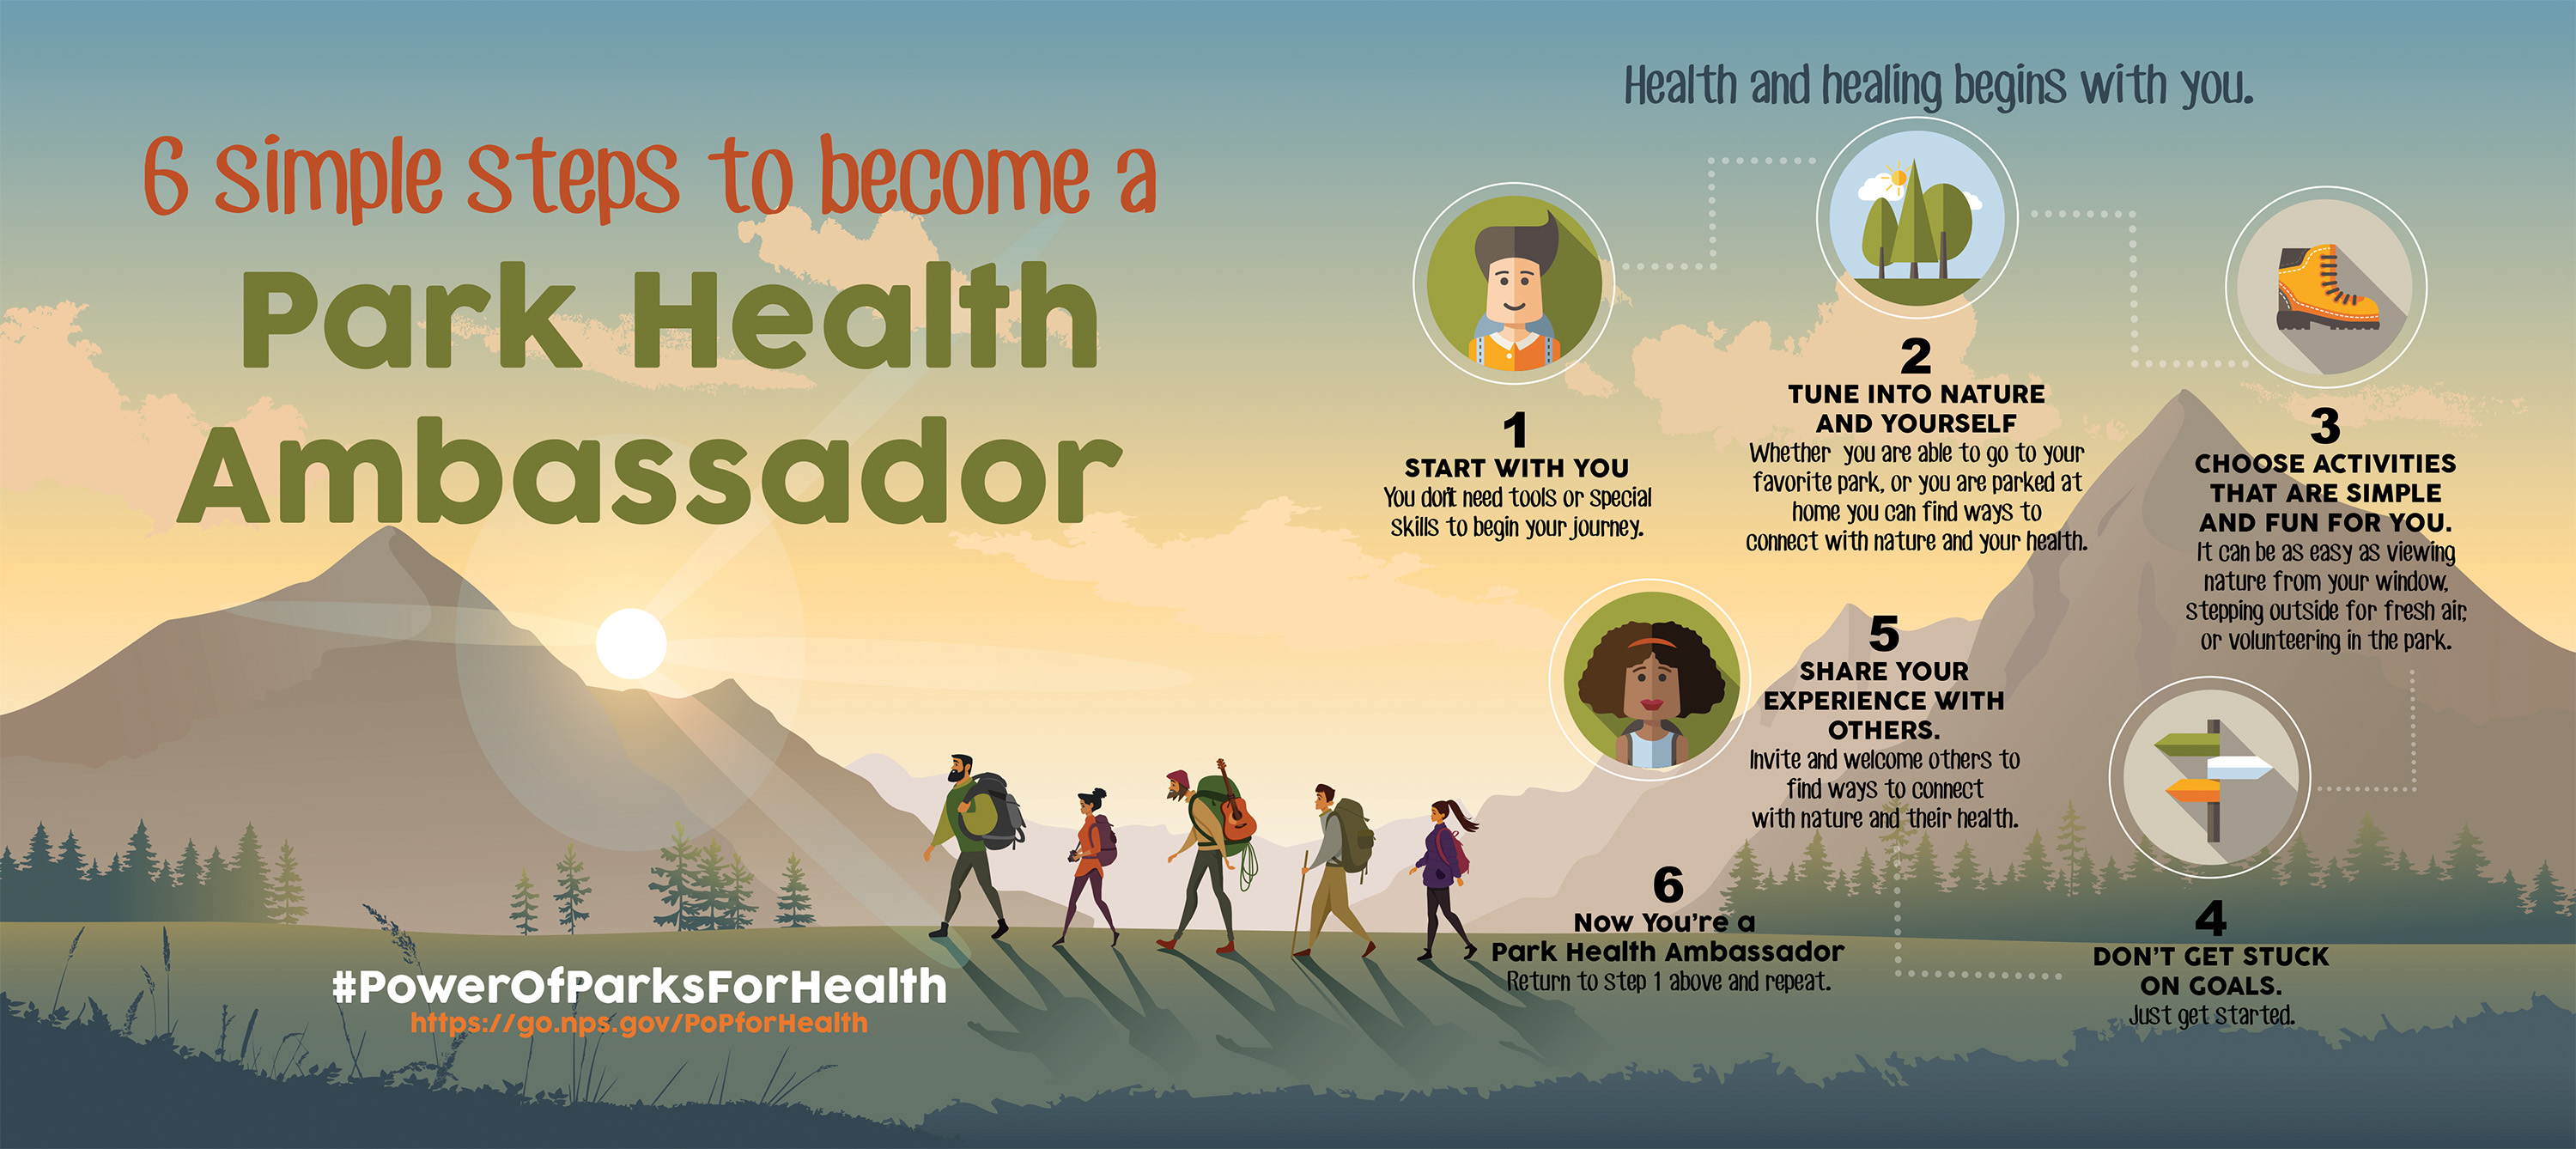 The 5 Amazing Benefits of Outdoor Exercise [Infographic]